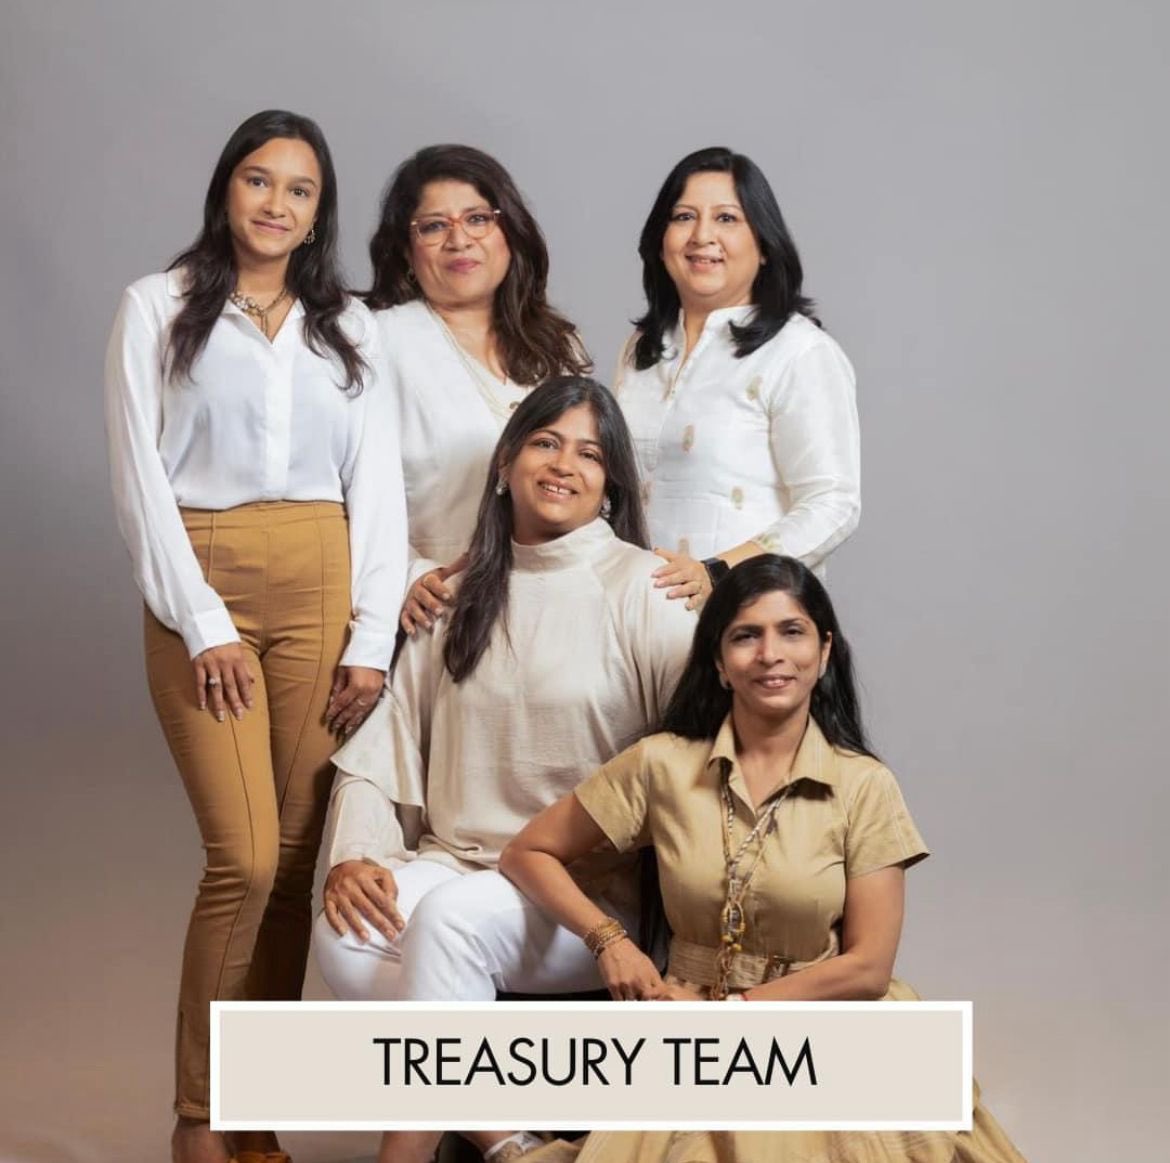 Spotlight on our Treasury Team! These dedicated chartered accountants ensure our chapter’s financial governance and transparency are top notch. The financial wizards of Flo Bangalore for 2024-25. #ficciflo #treasuryteam #flobangalore #bangalore #ficci #powertoempowet